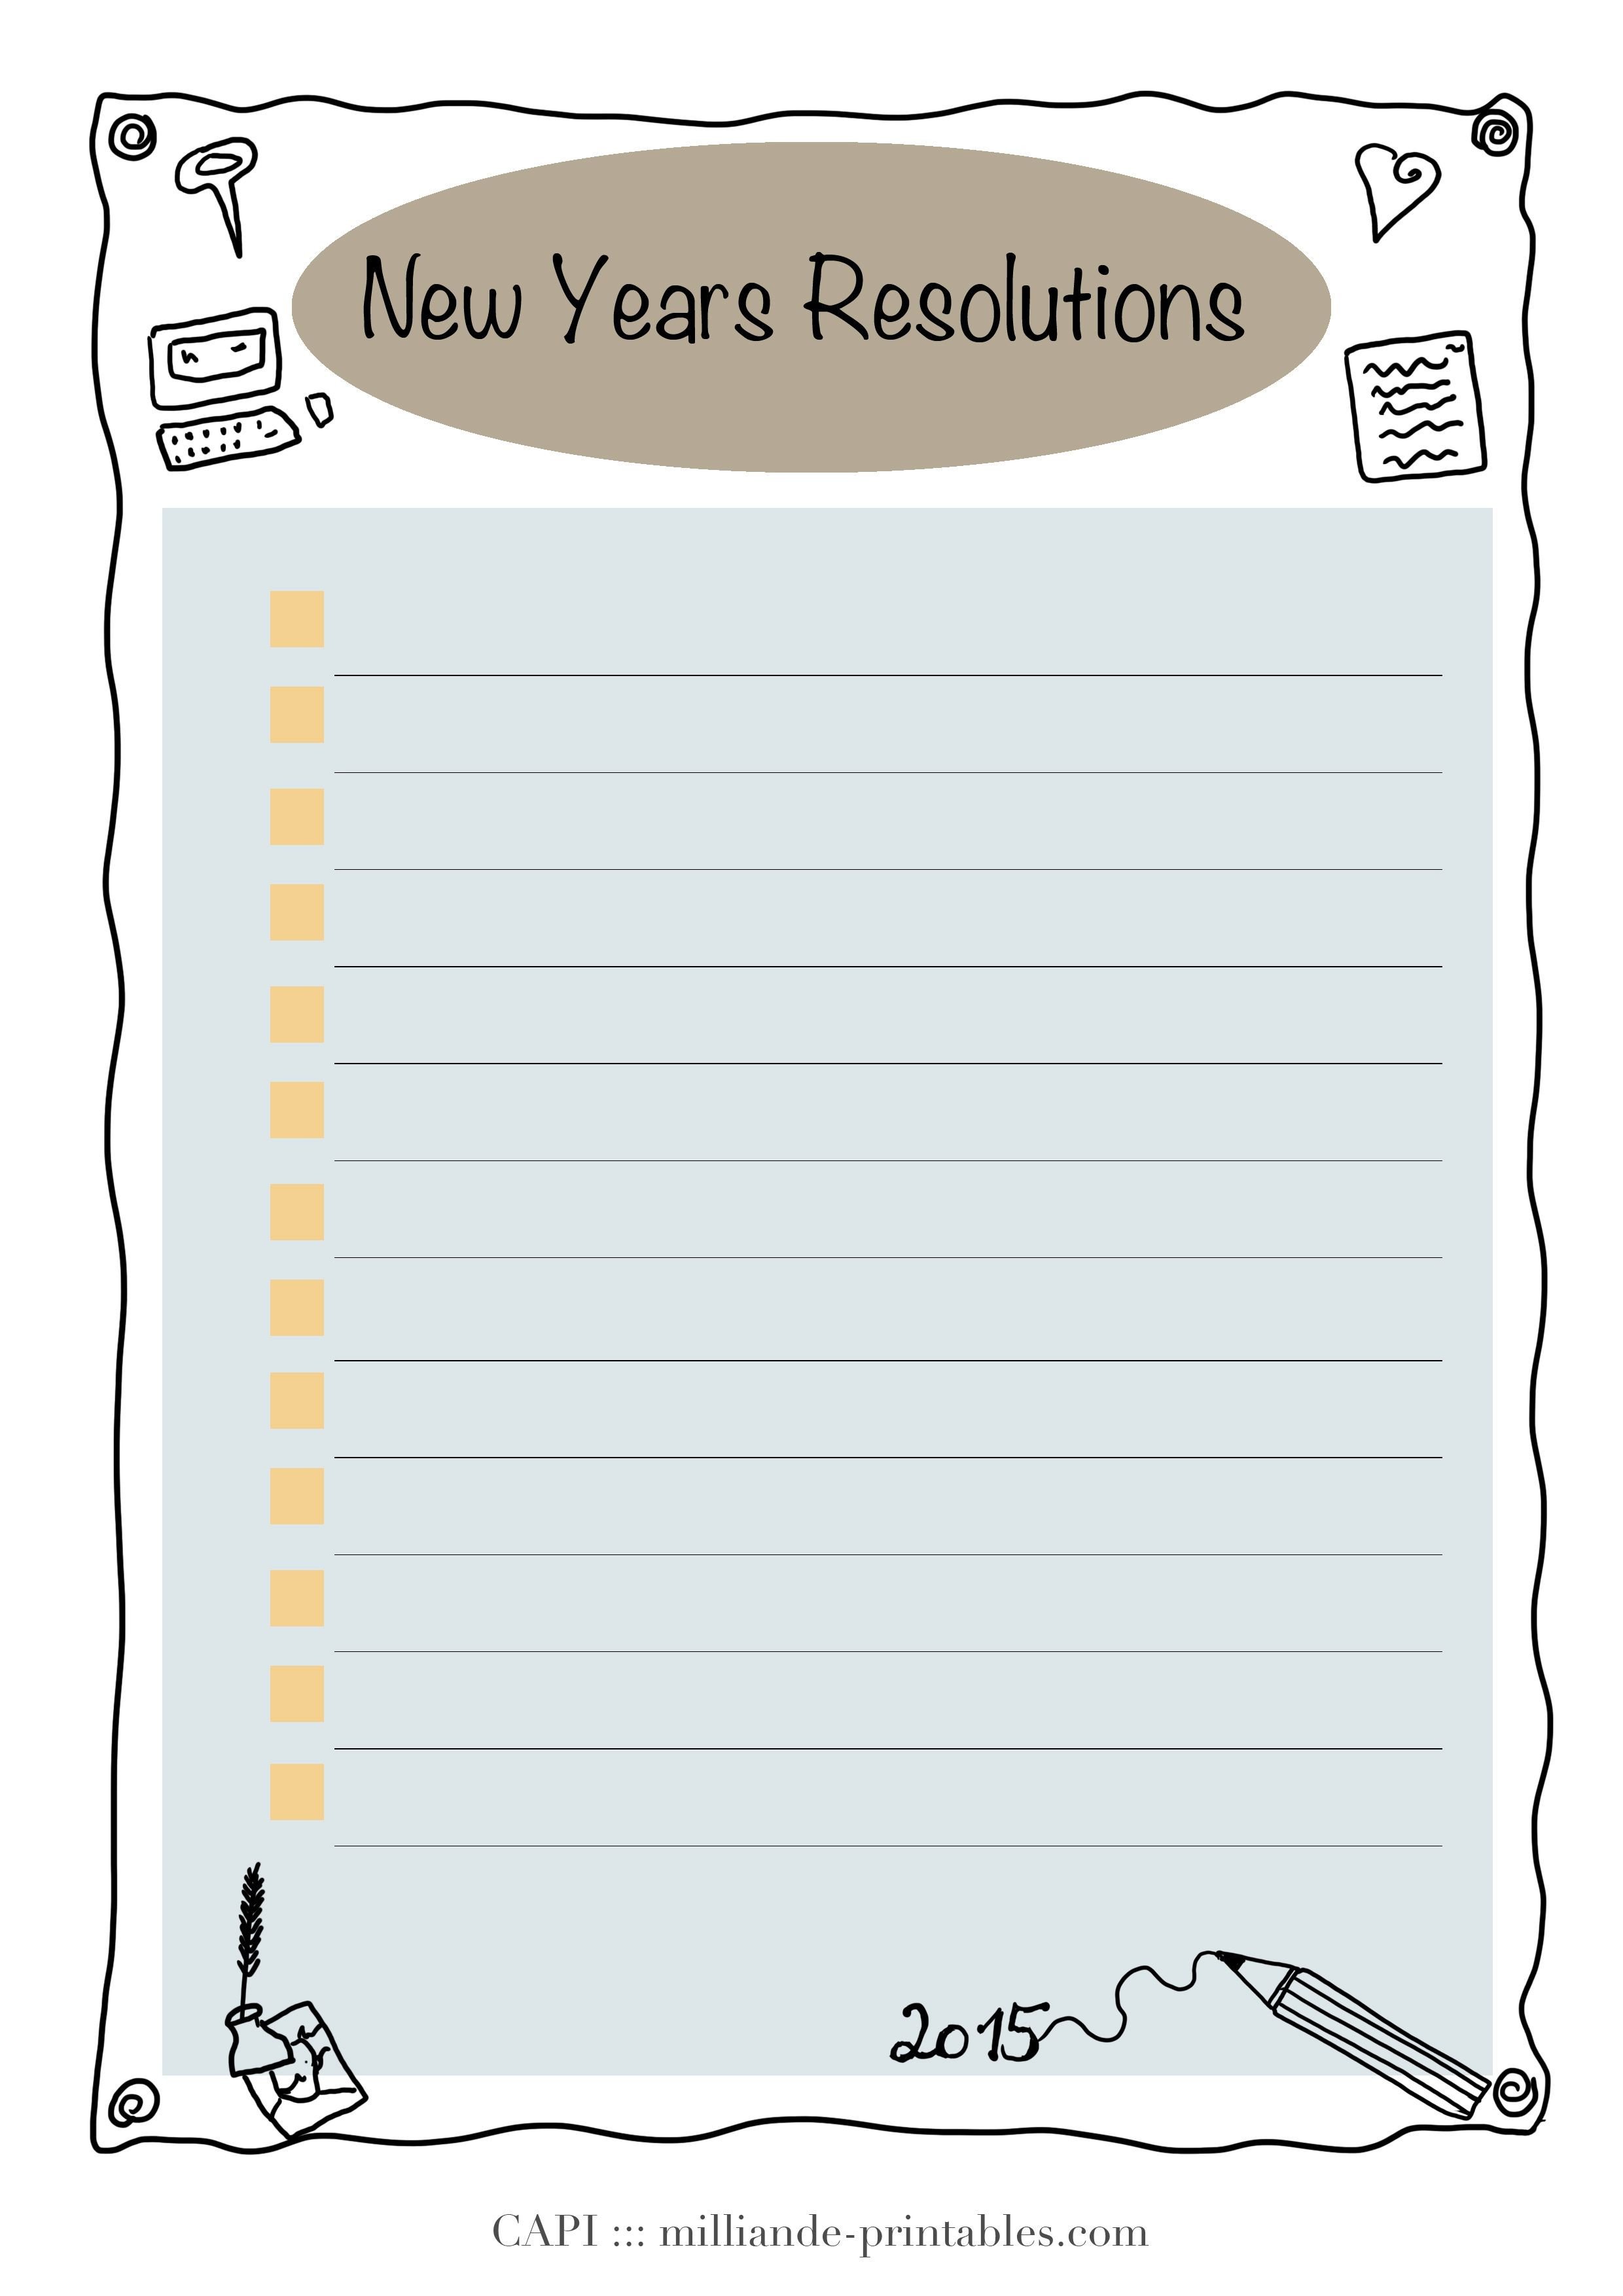 New Years Resolution Template A Simple Tick List New Year Resolution Card Printable